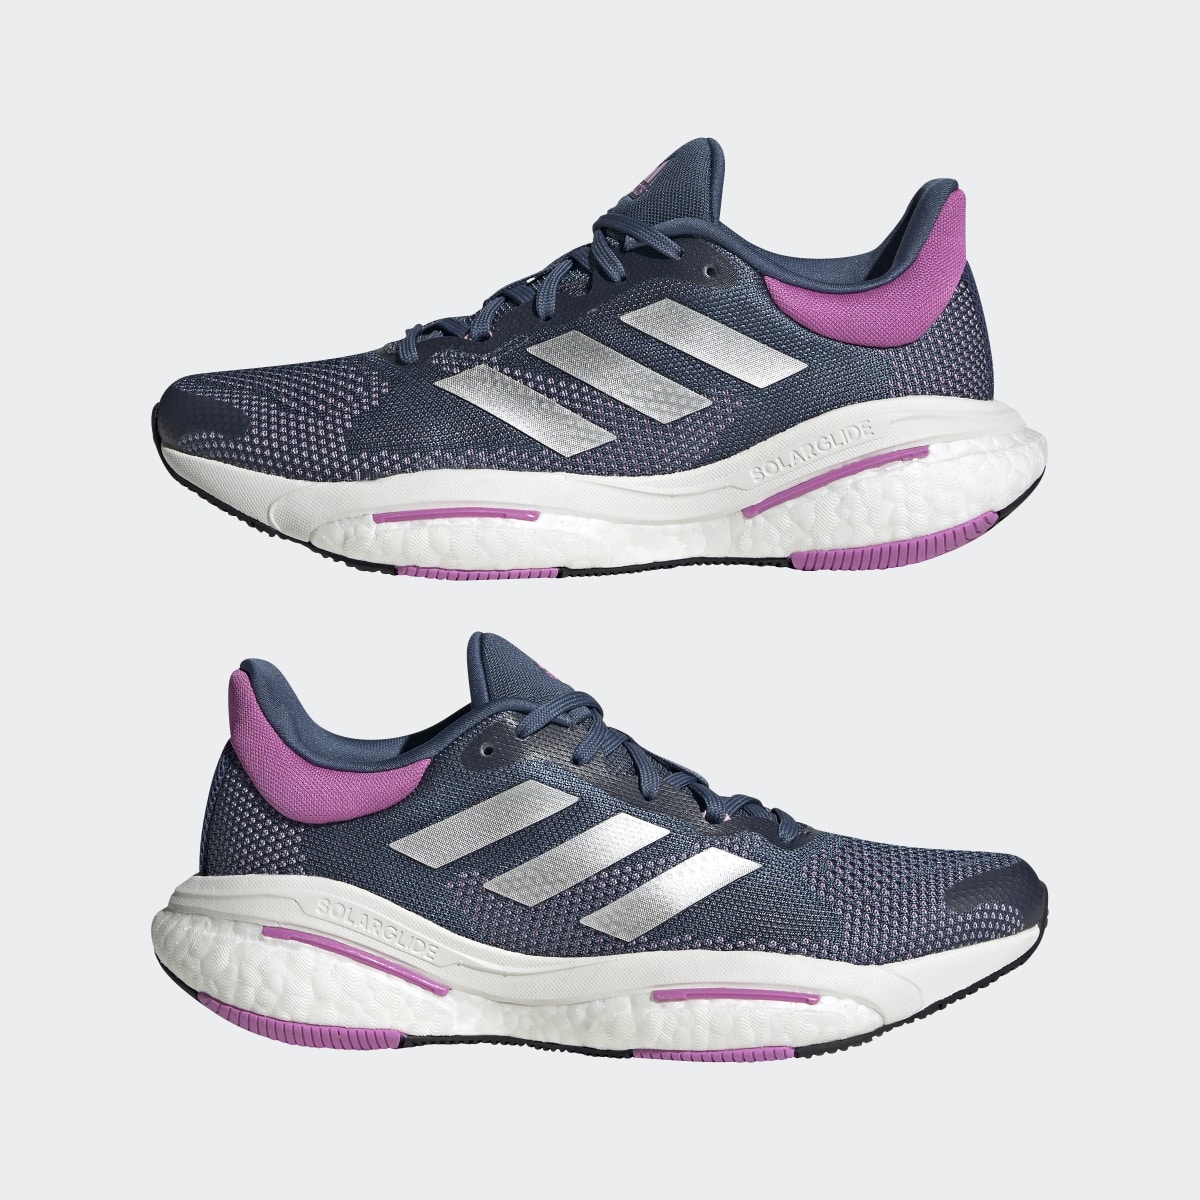 Adidas Solarglide 5 Shoes. 8